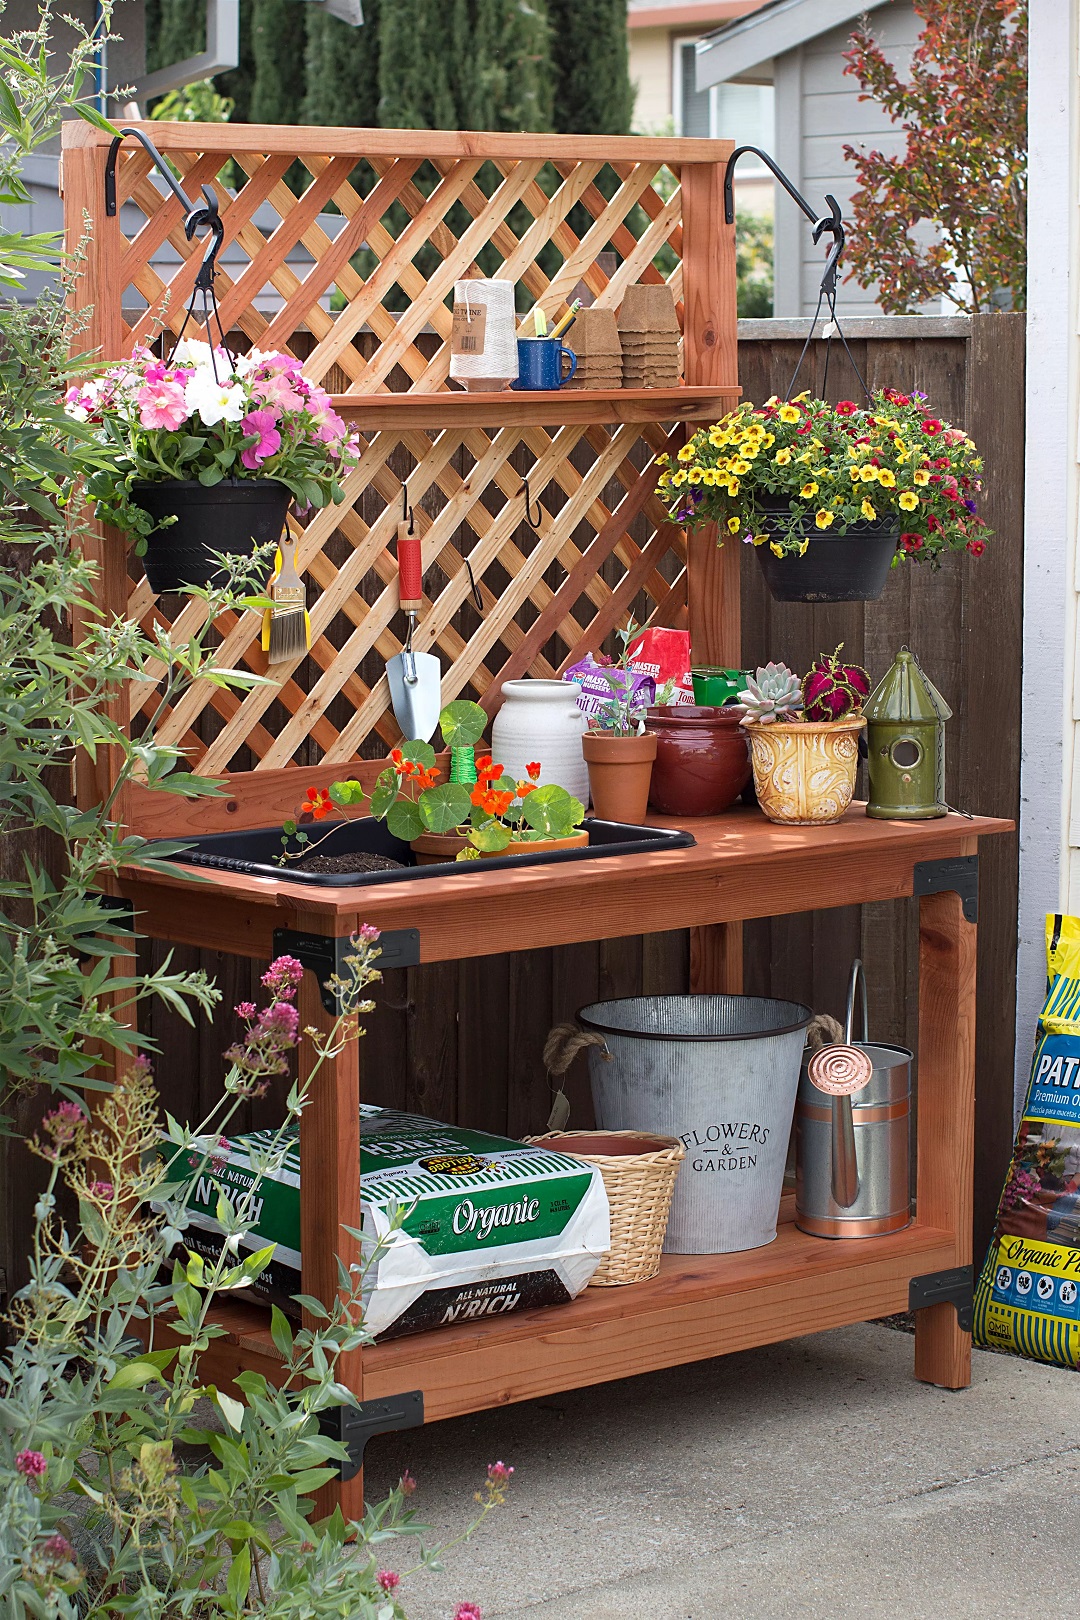 diy: how to build an outdoor potting bench - building strong